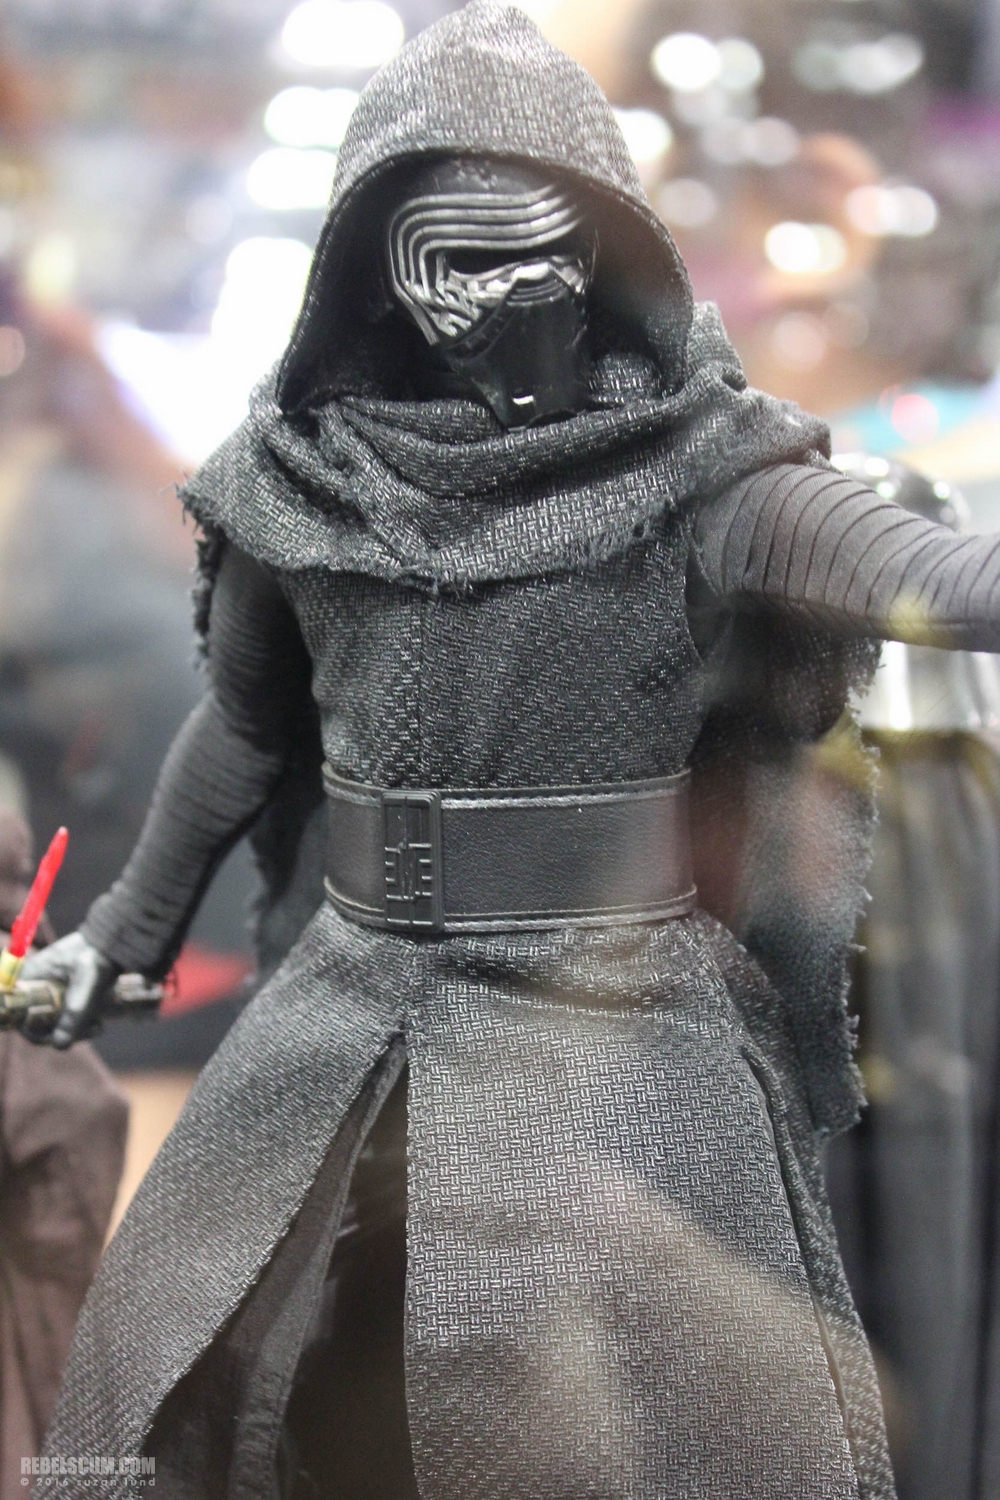 wondercon-2016-sideshow-collectibles-hot-toys-017.jpg